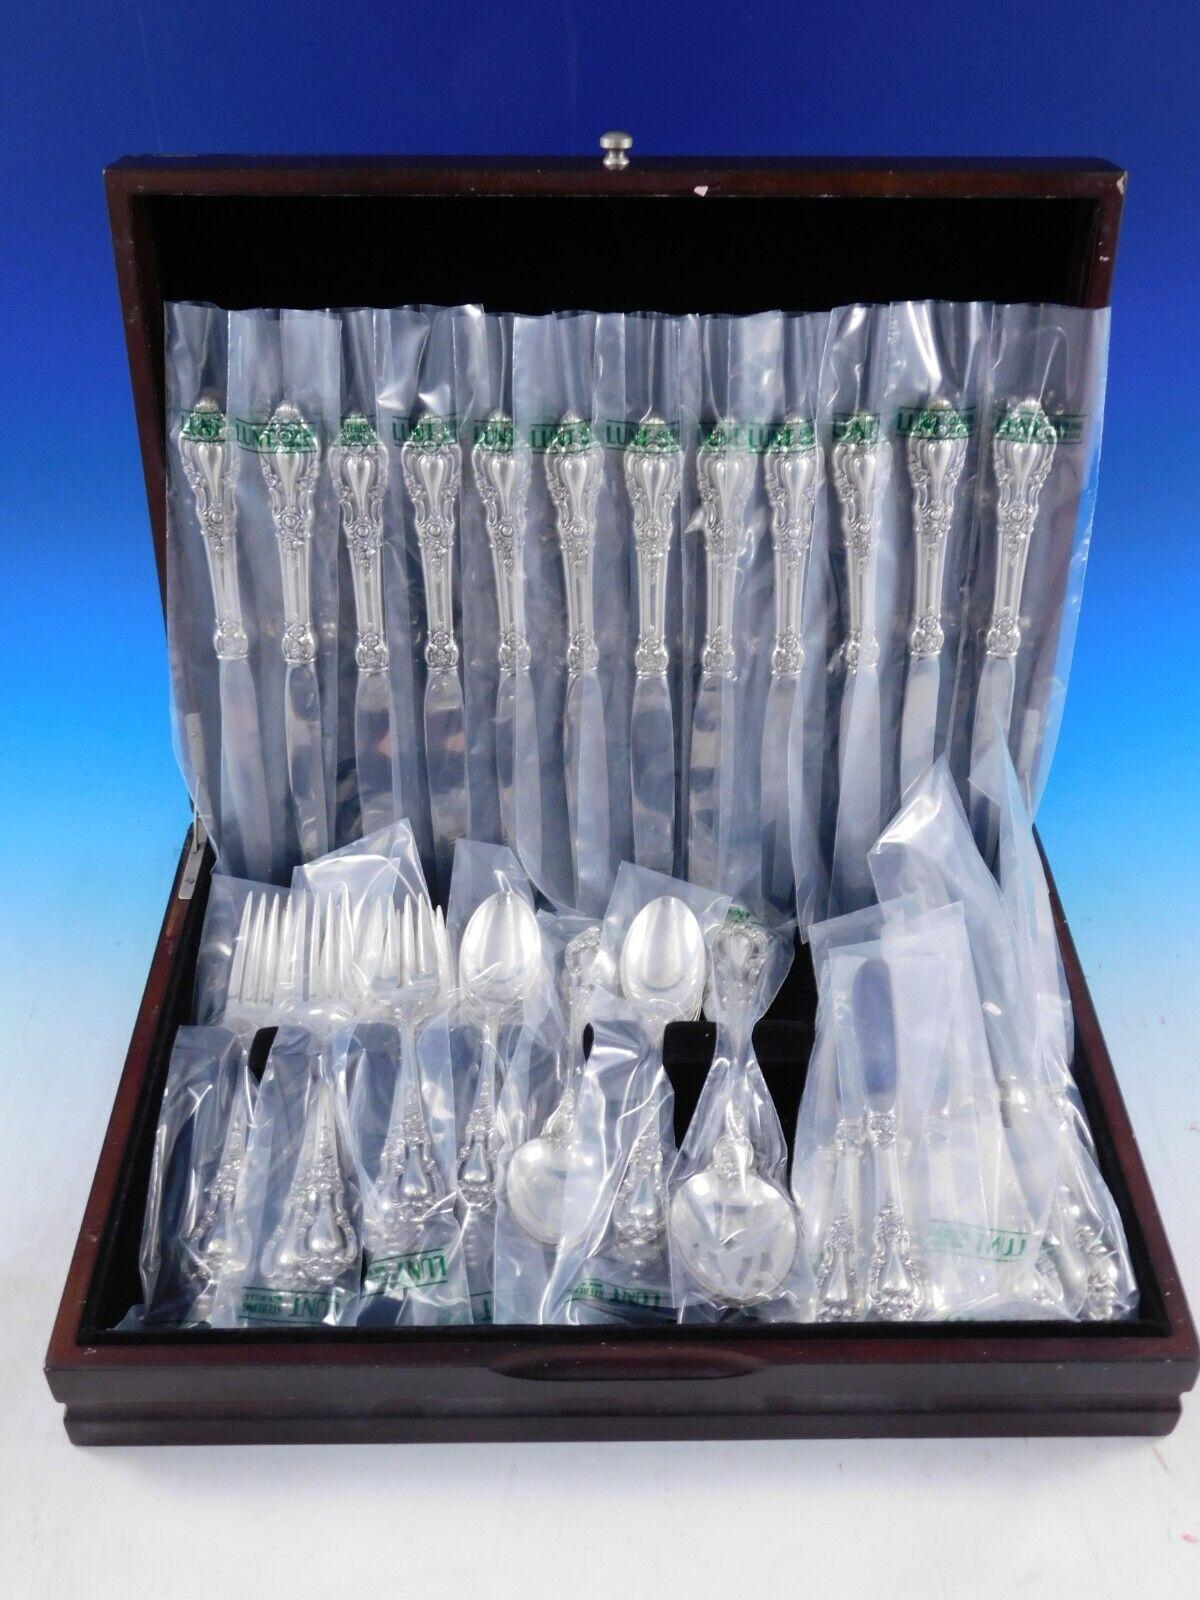 The elegance and quality of Lunt sterling flatware is evident in the Eloquence pattern. This is Lunt's most popular pattern and features pierced handles and baroque motifs.
Unused Eloquence by Lunt sterling silver Flatware set, 58 pieces. This set